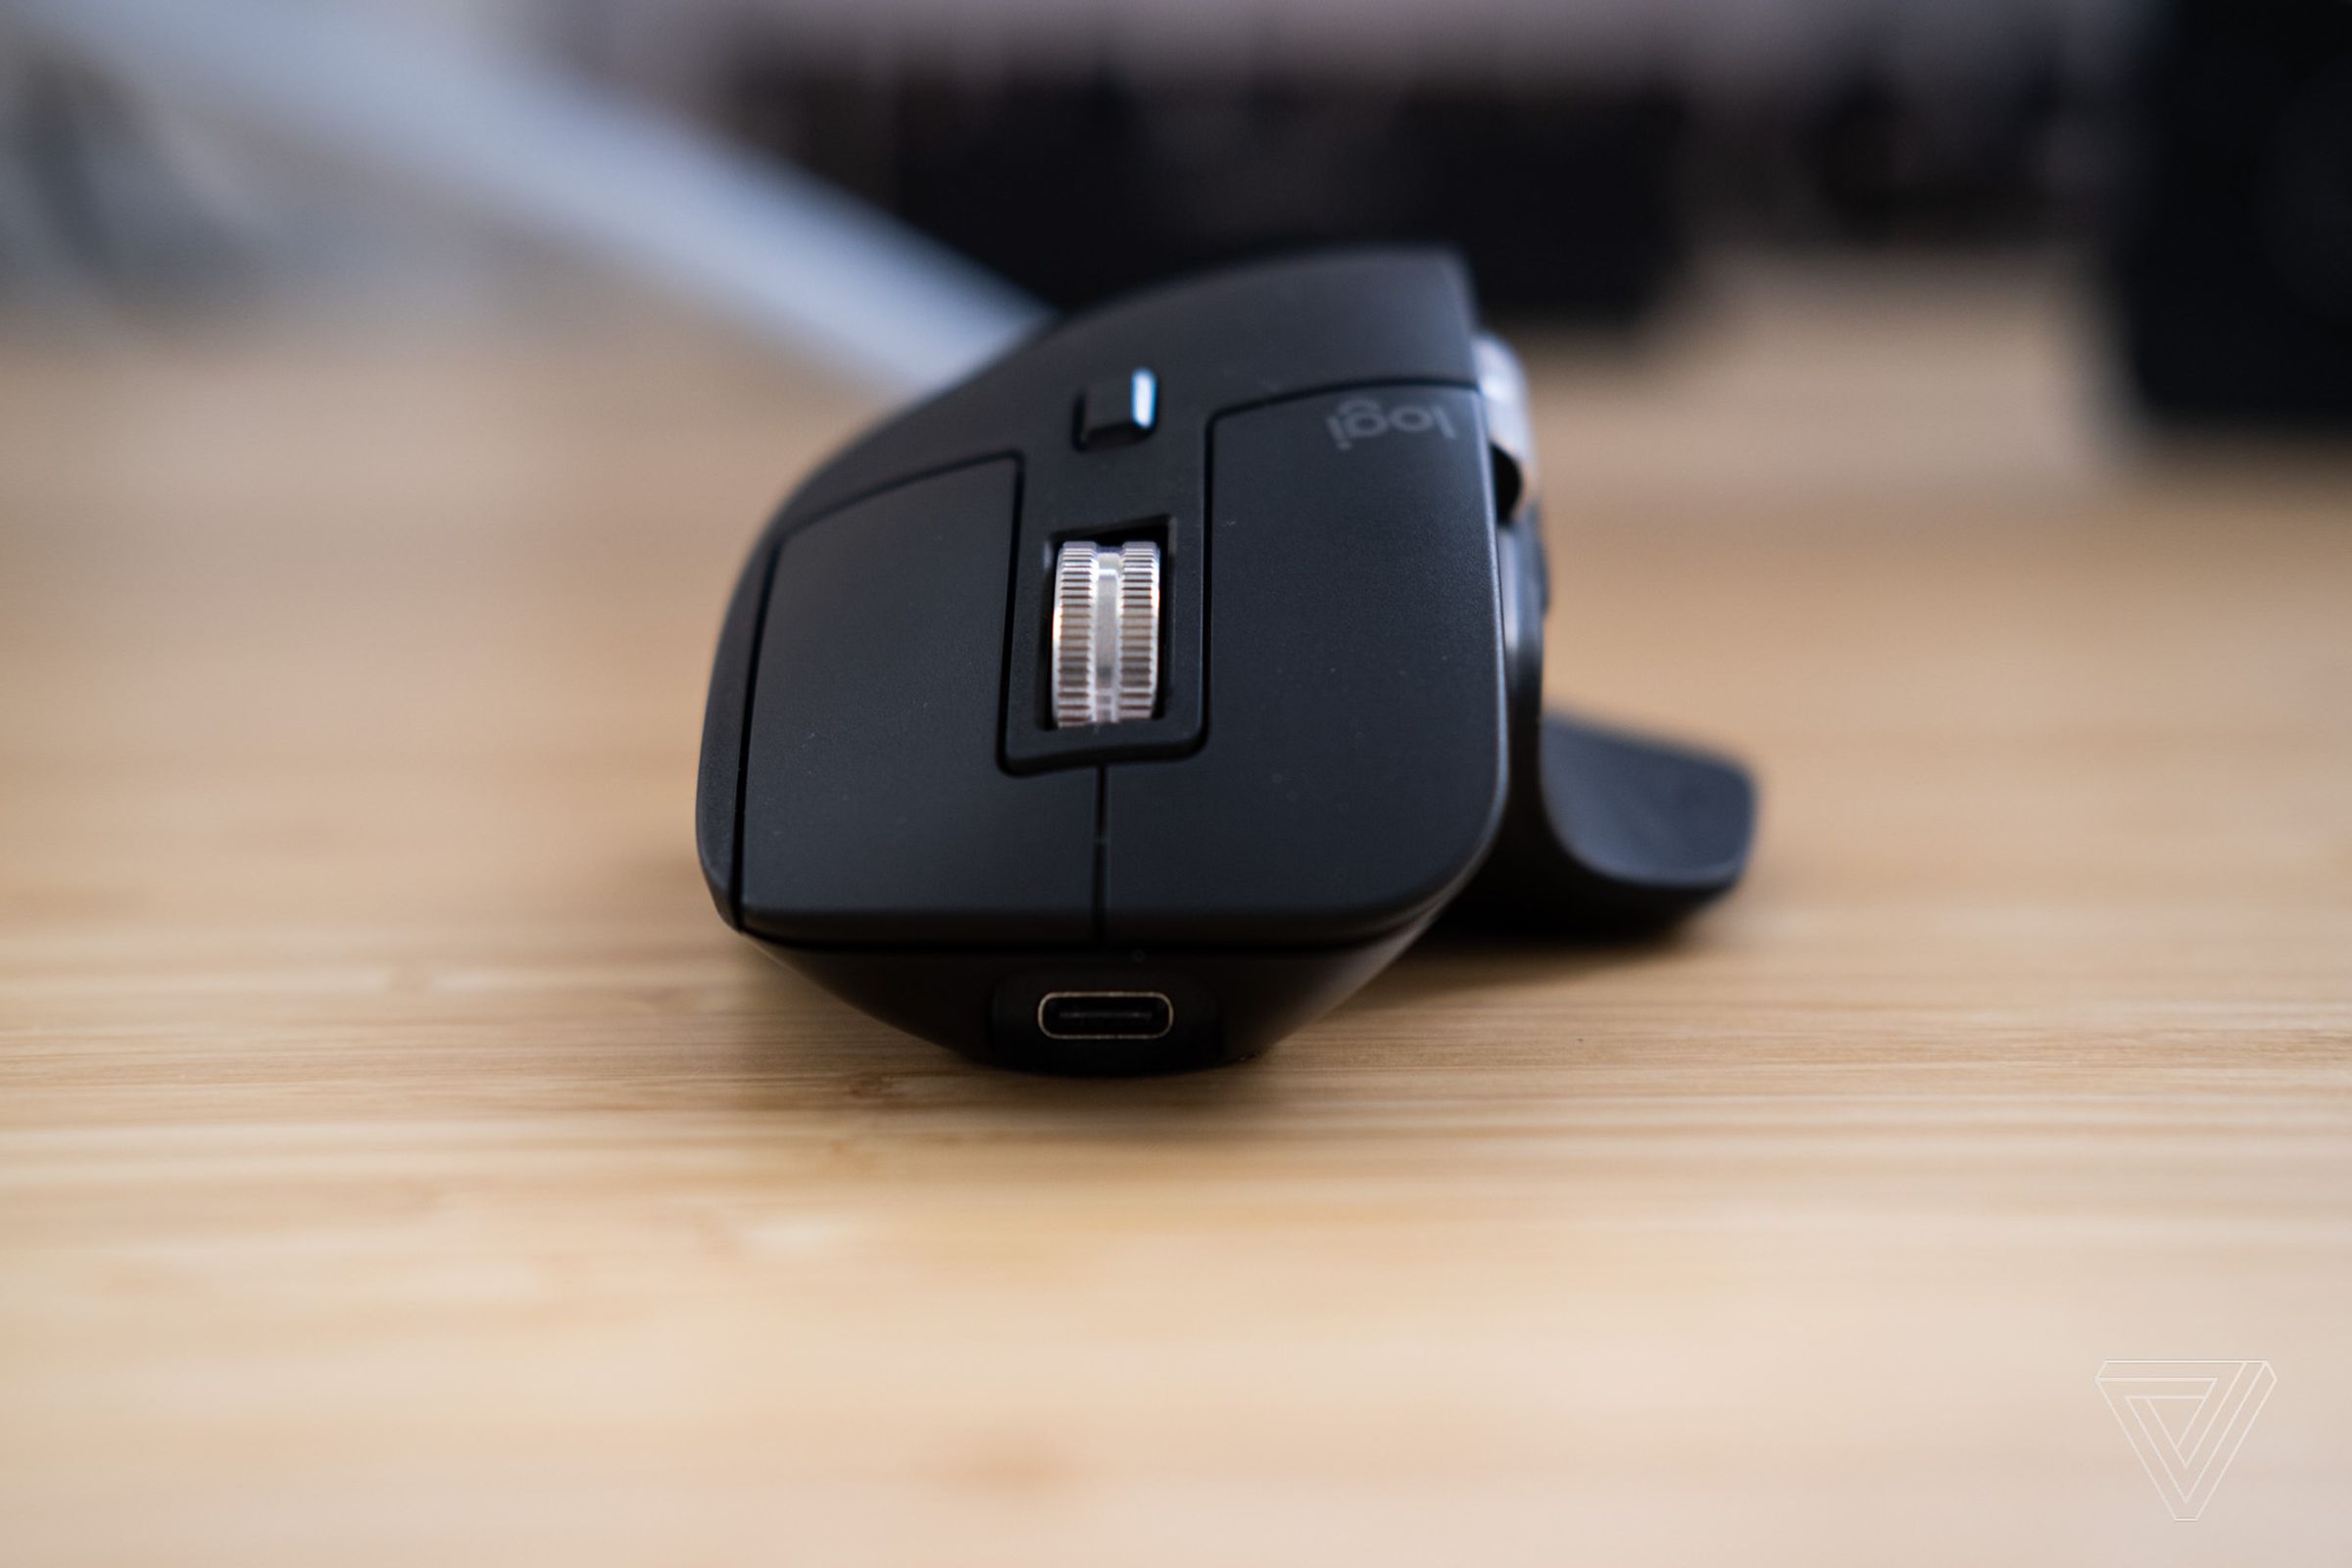 The Logitech MX Master 3S mouse as viewed from the front.